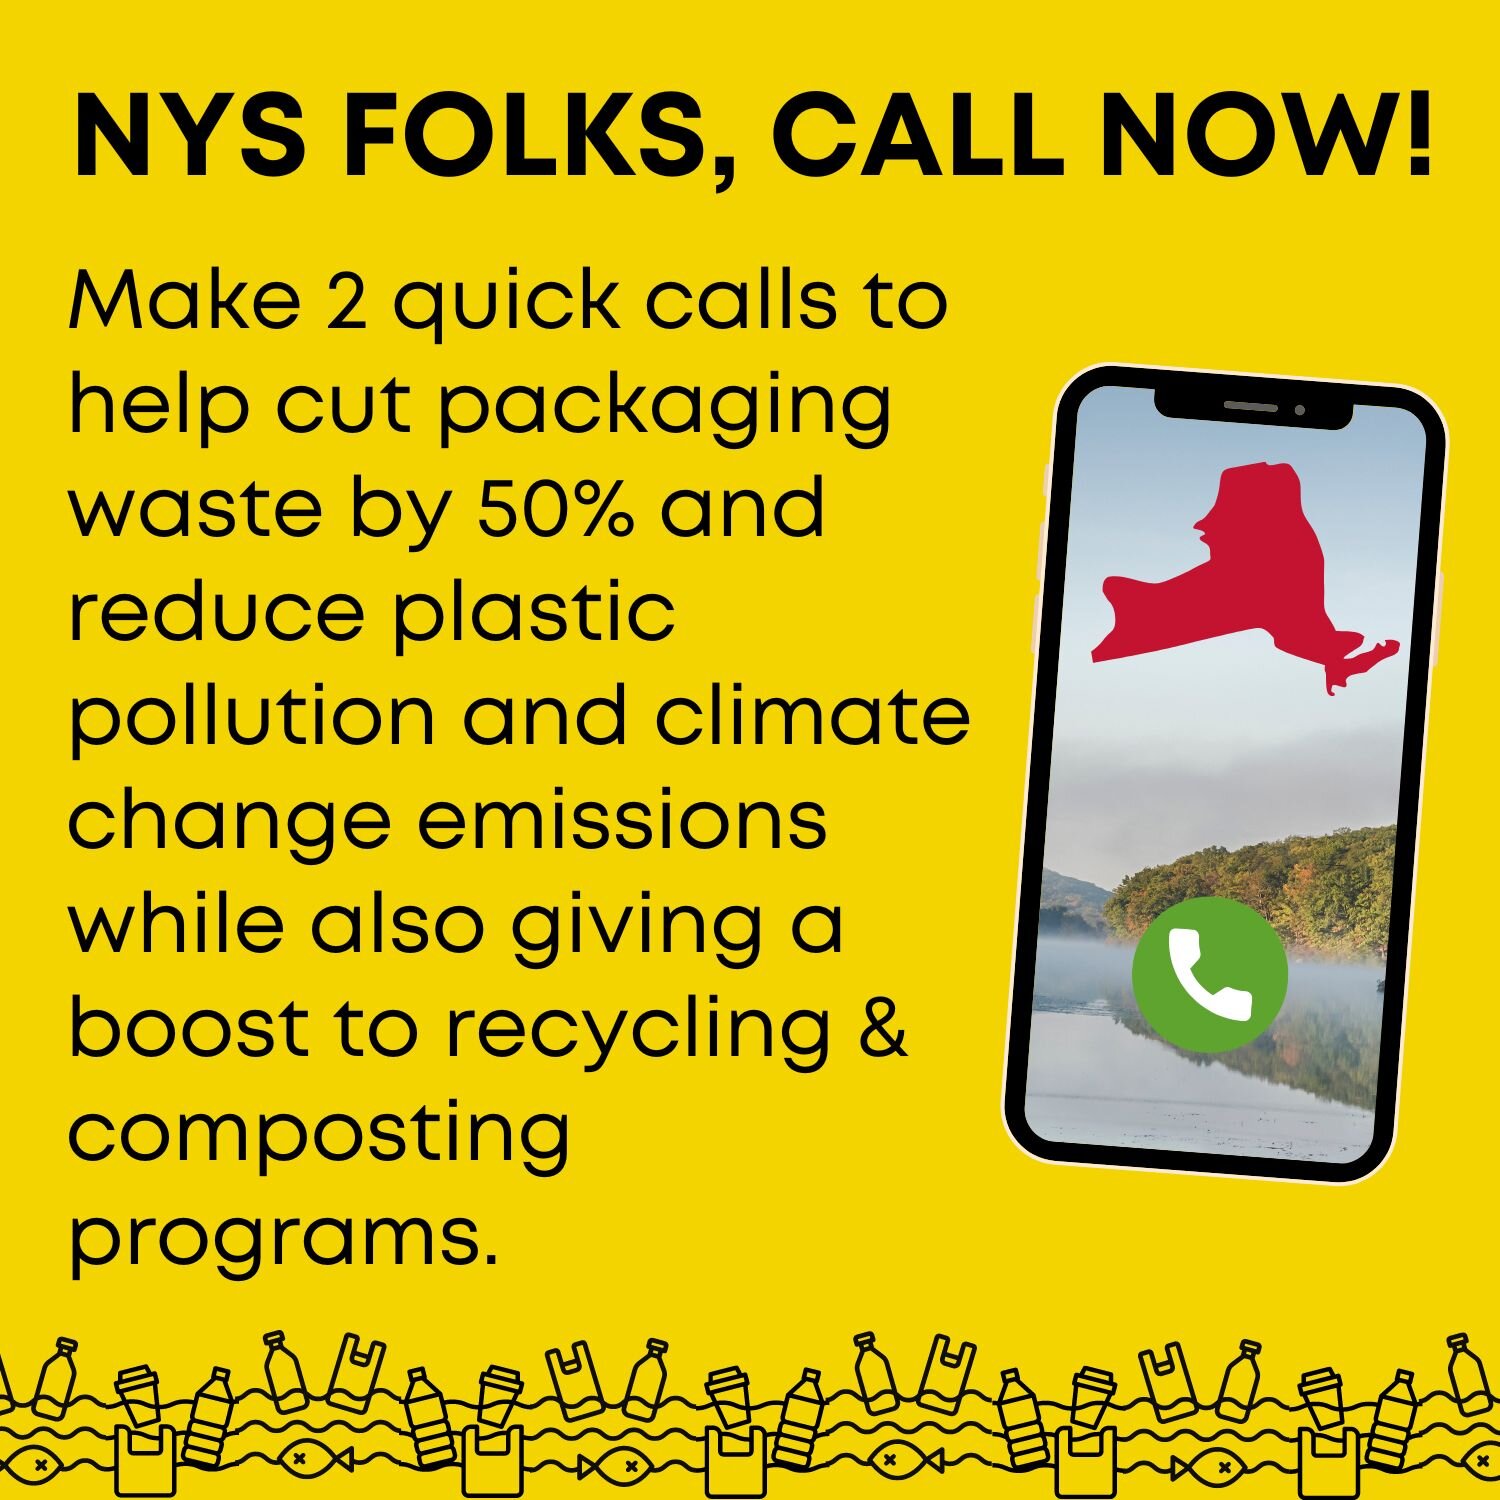 URGENT:📲NYS folks, please call your State Senator &amp; Assemblymember to urge them to co-sponsor and work to pass the Packaging Reduction &amp; Recycling Infrastructure Act before the session ends on June 8! Time is running out to make this despera